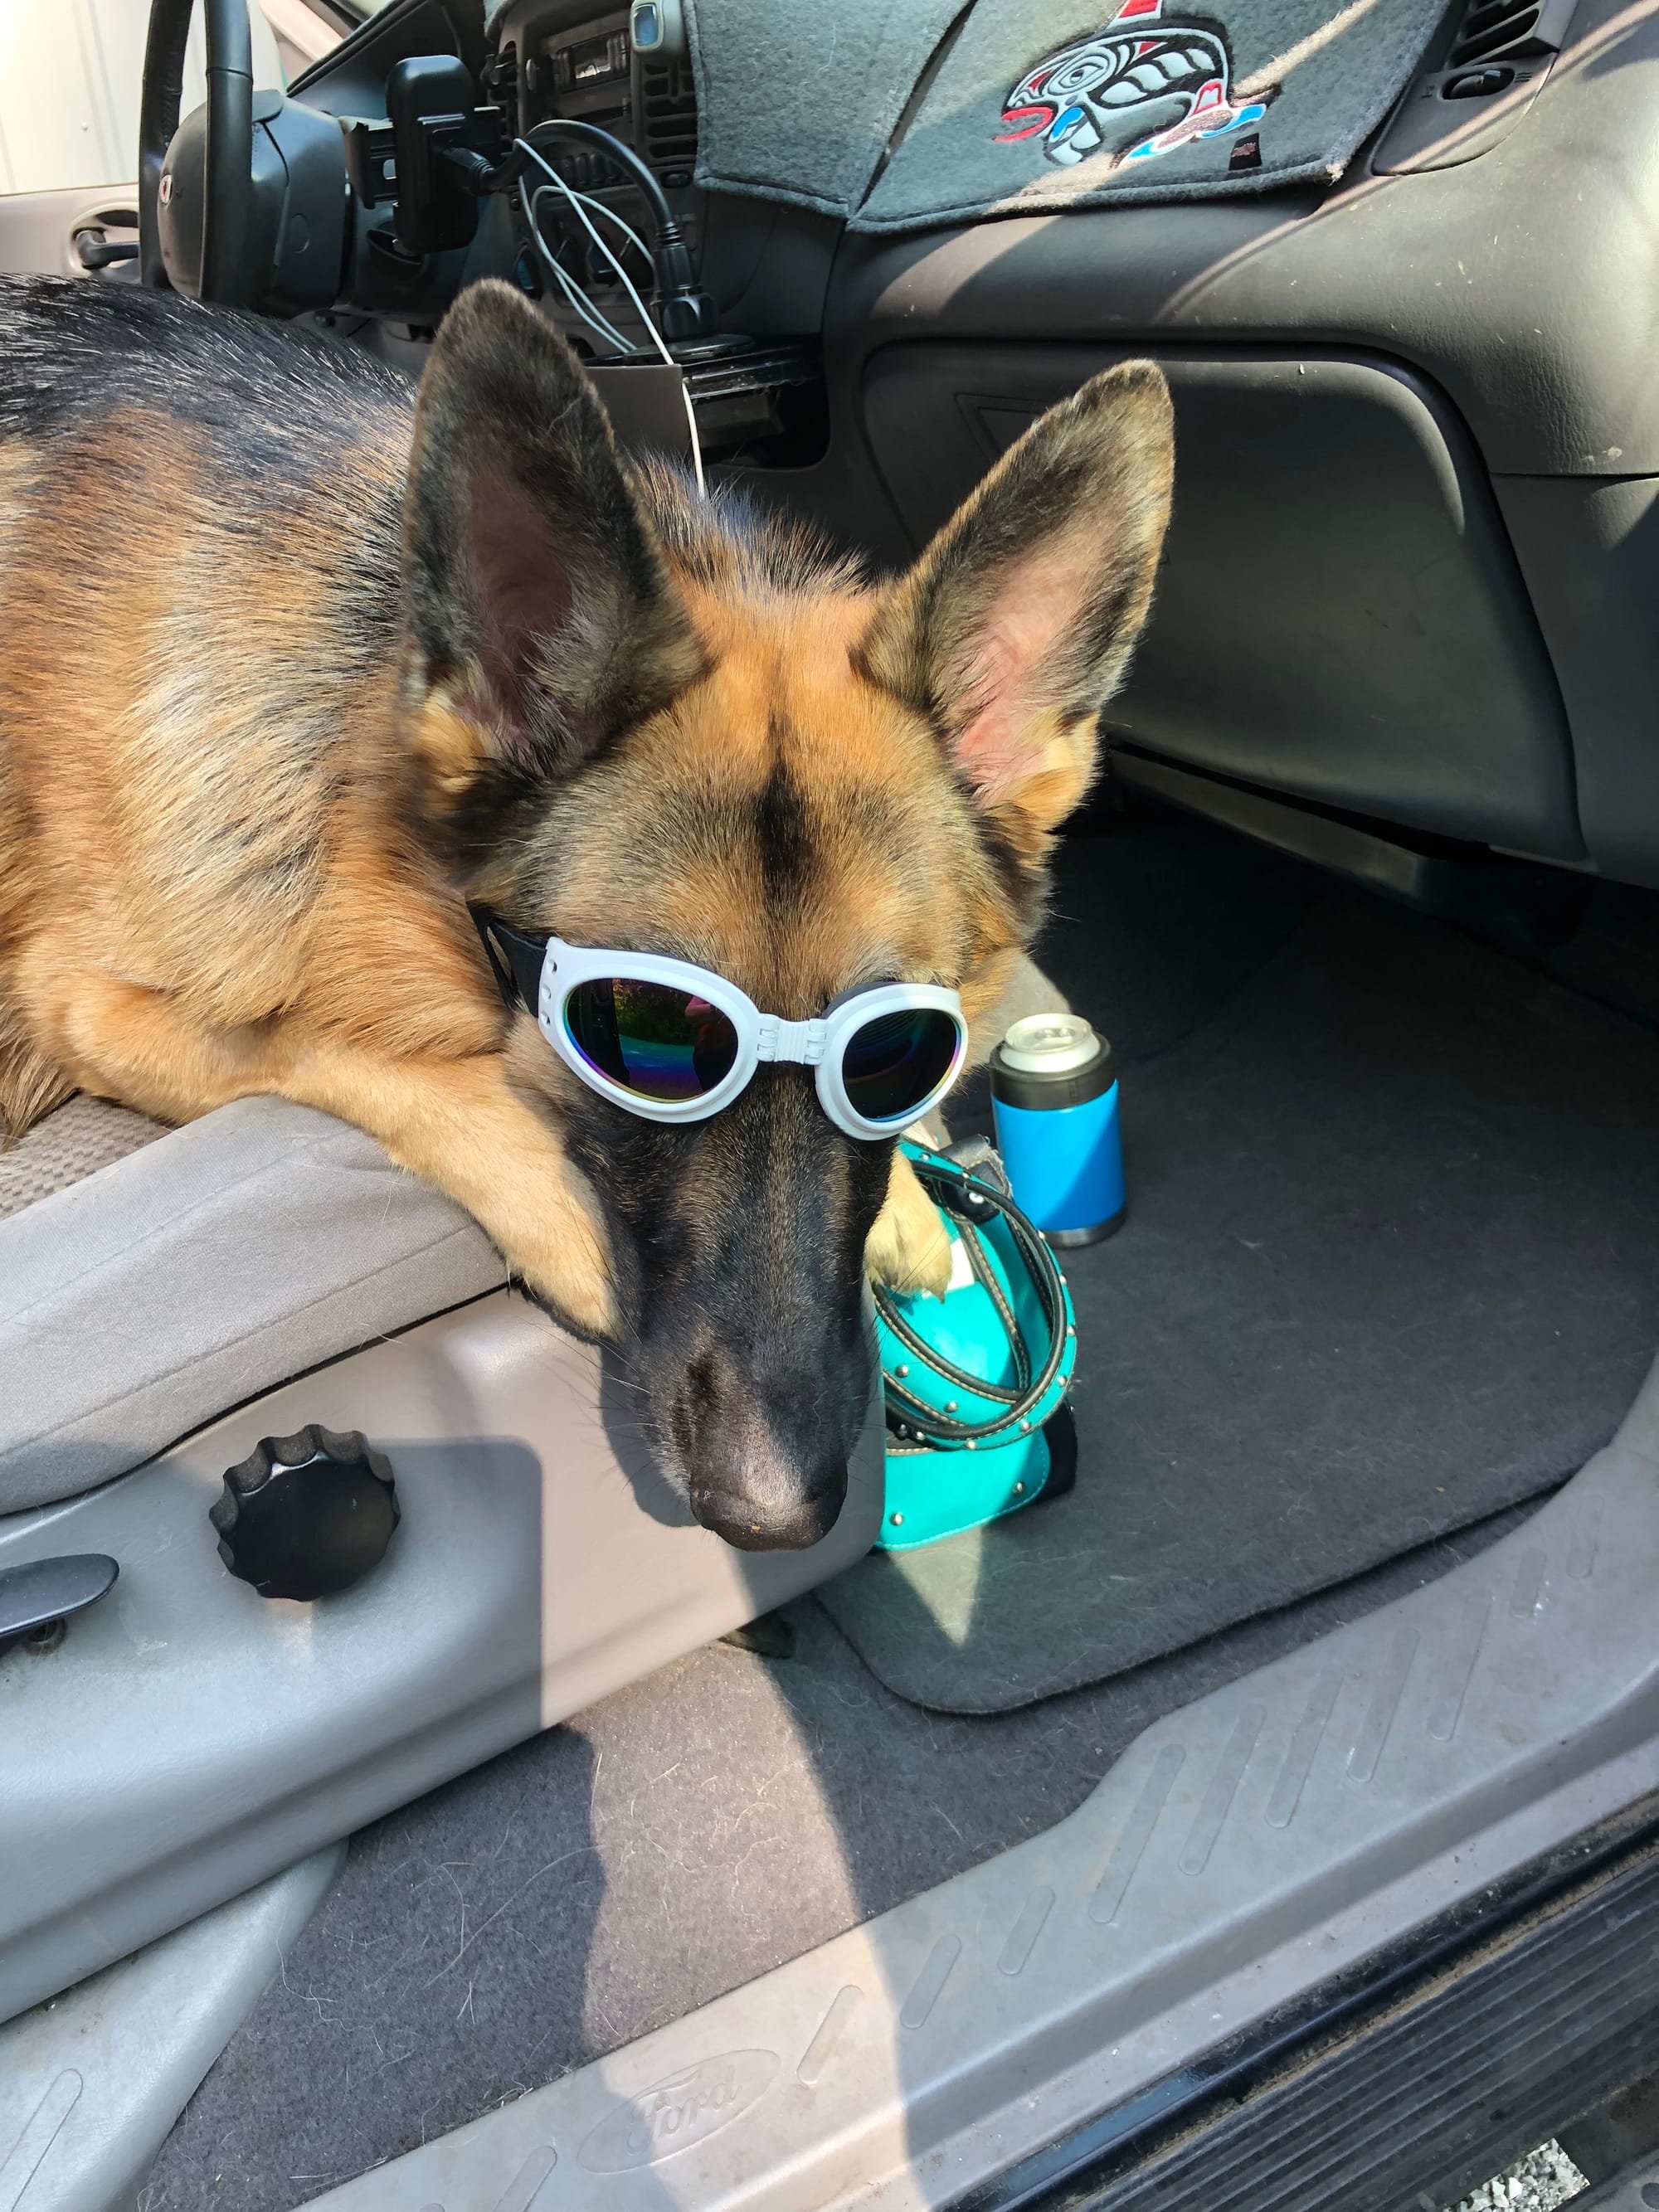 Protecting the eyes from UV rays Aug 2019